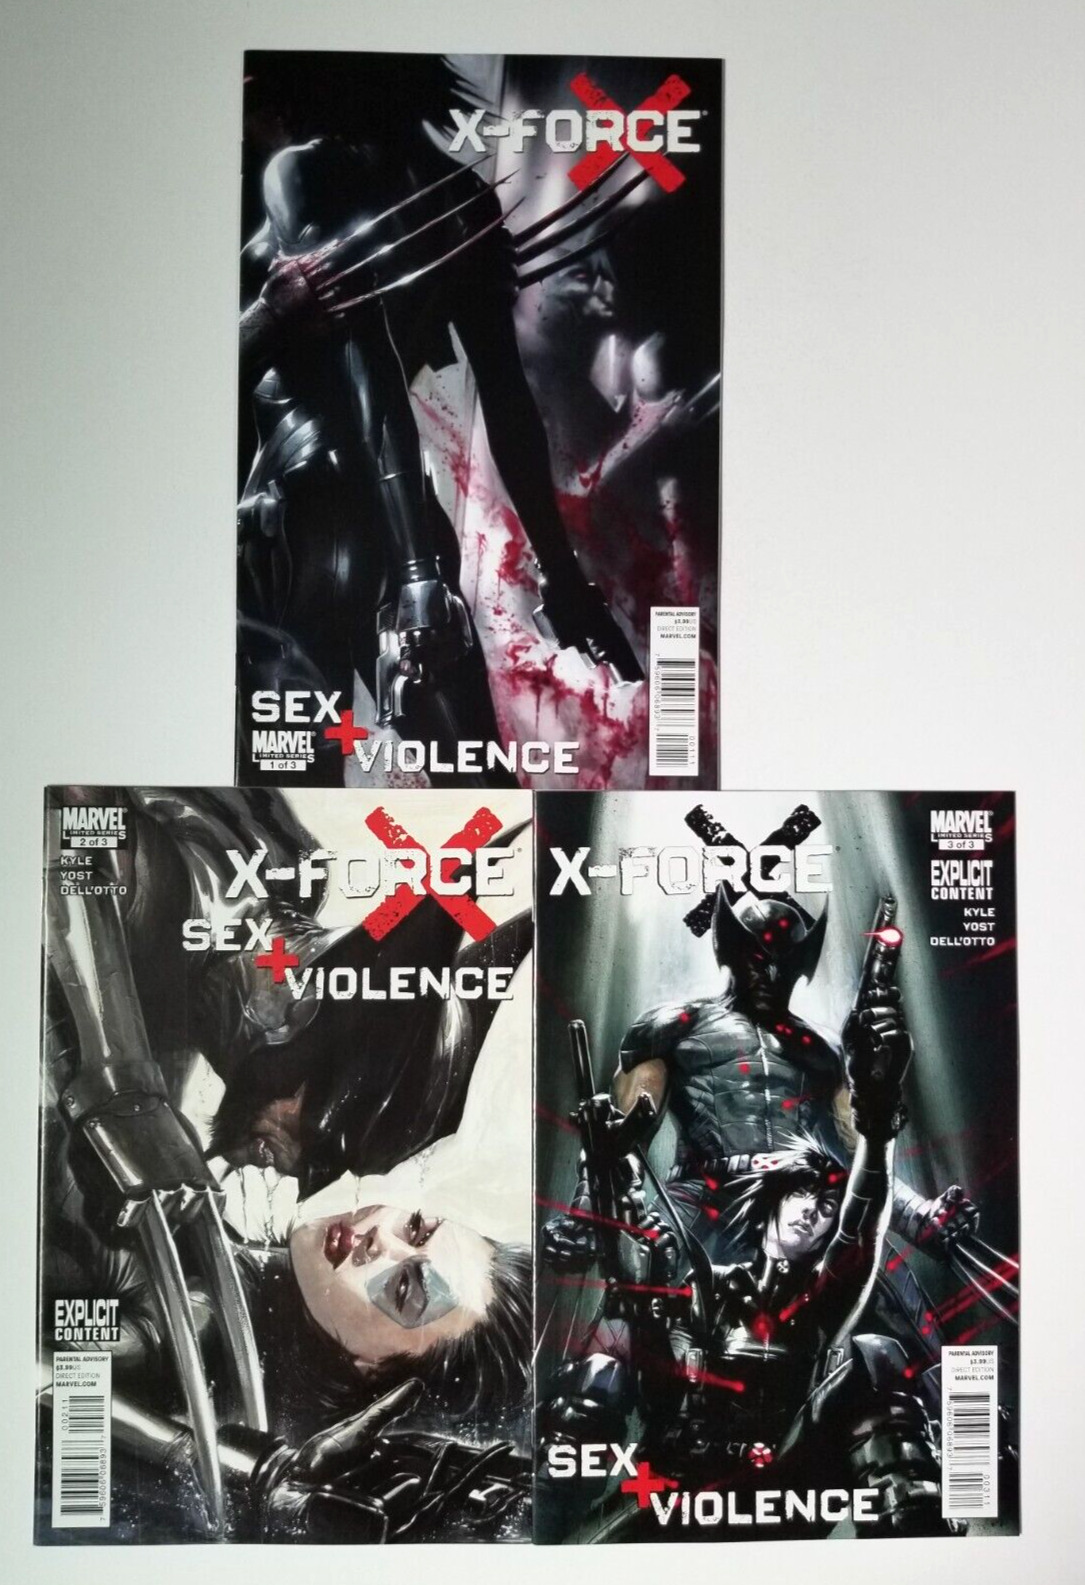 X-Force Sex and Violence #1-3 (2010 Marvel Comics) 1 2 3 Complete Set, Dell Otto